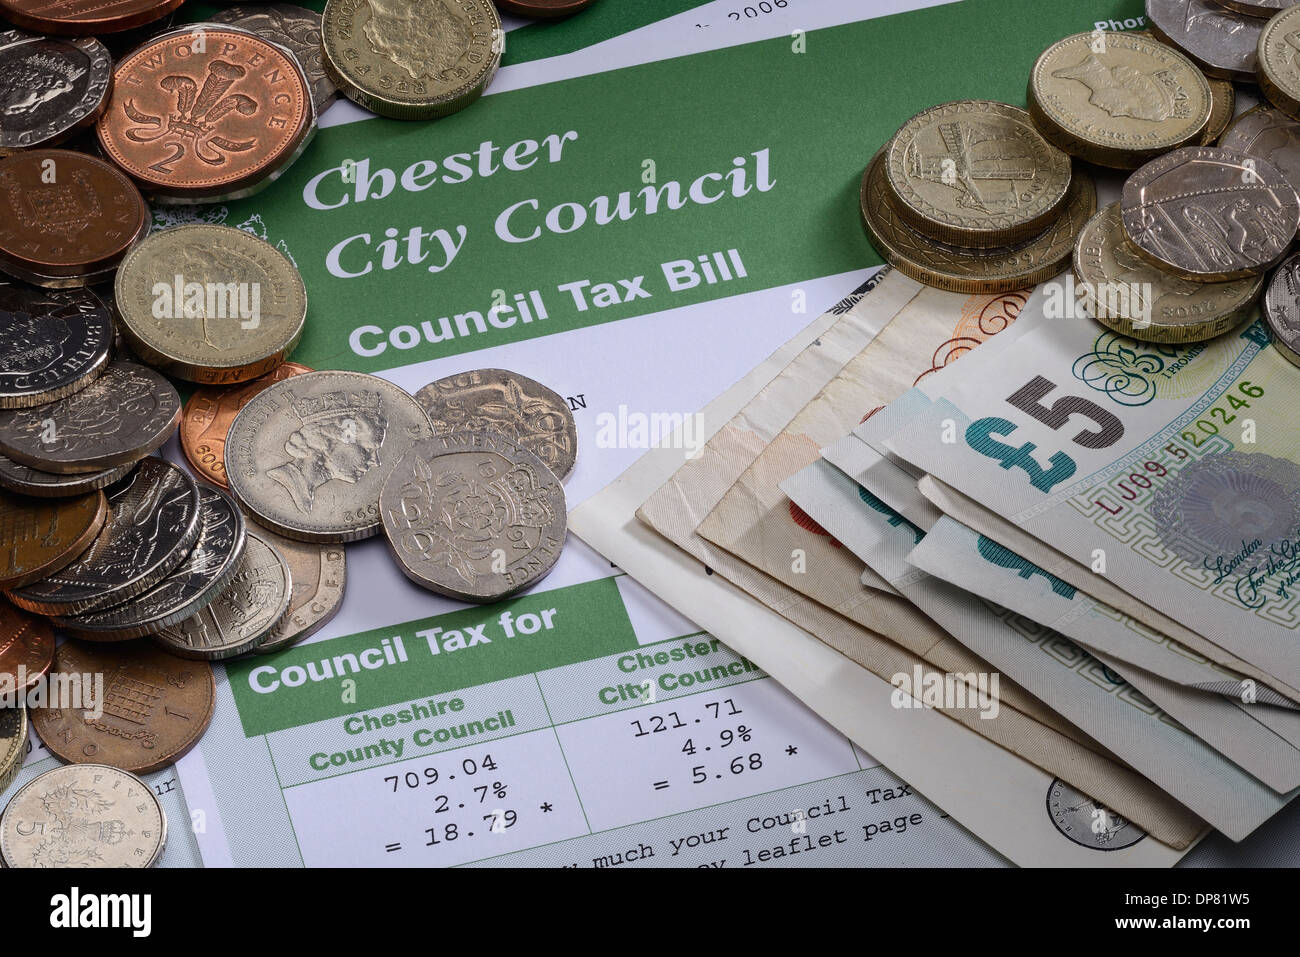 Chester City Council Tax bill with coins and money Stock Photo